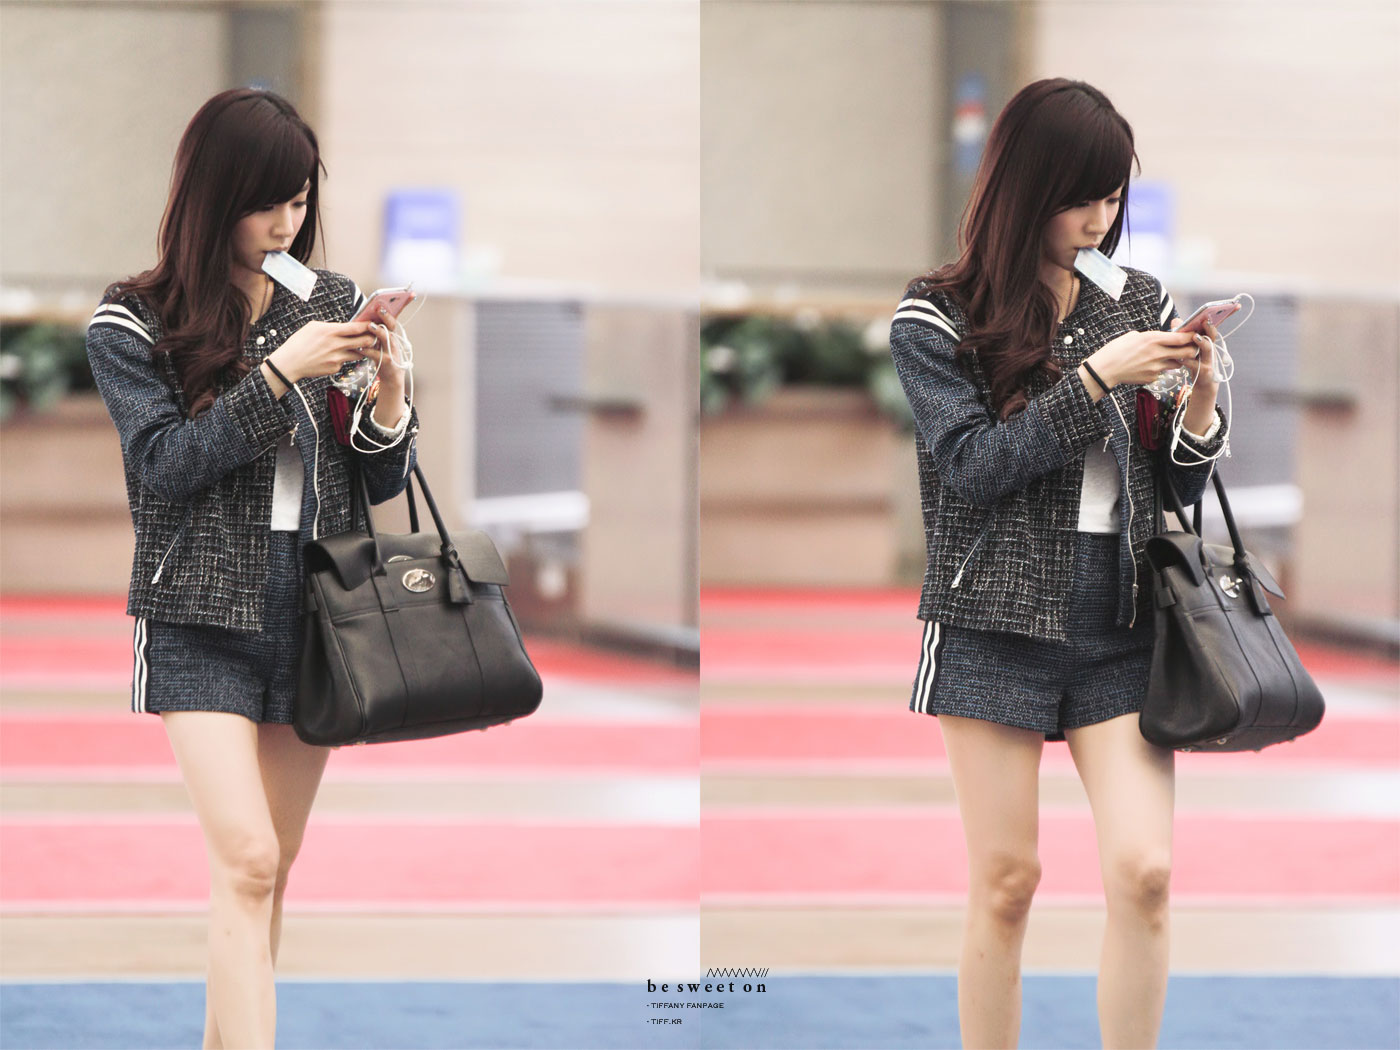 Tiffany Incheon Airport to Los Angeles